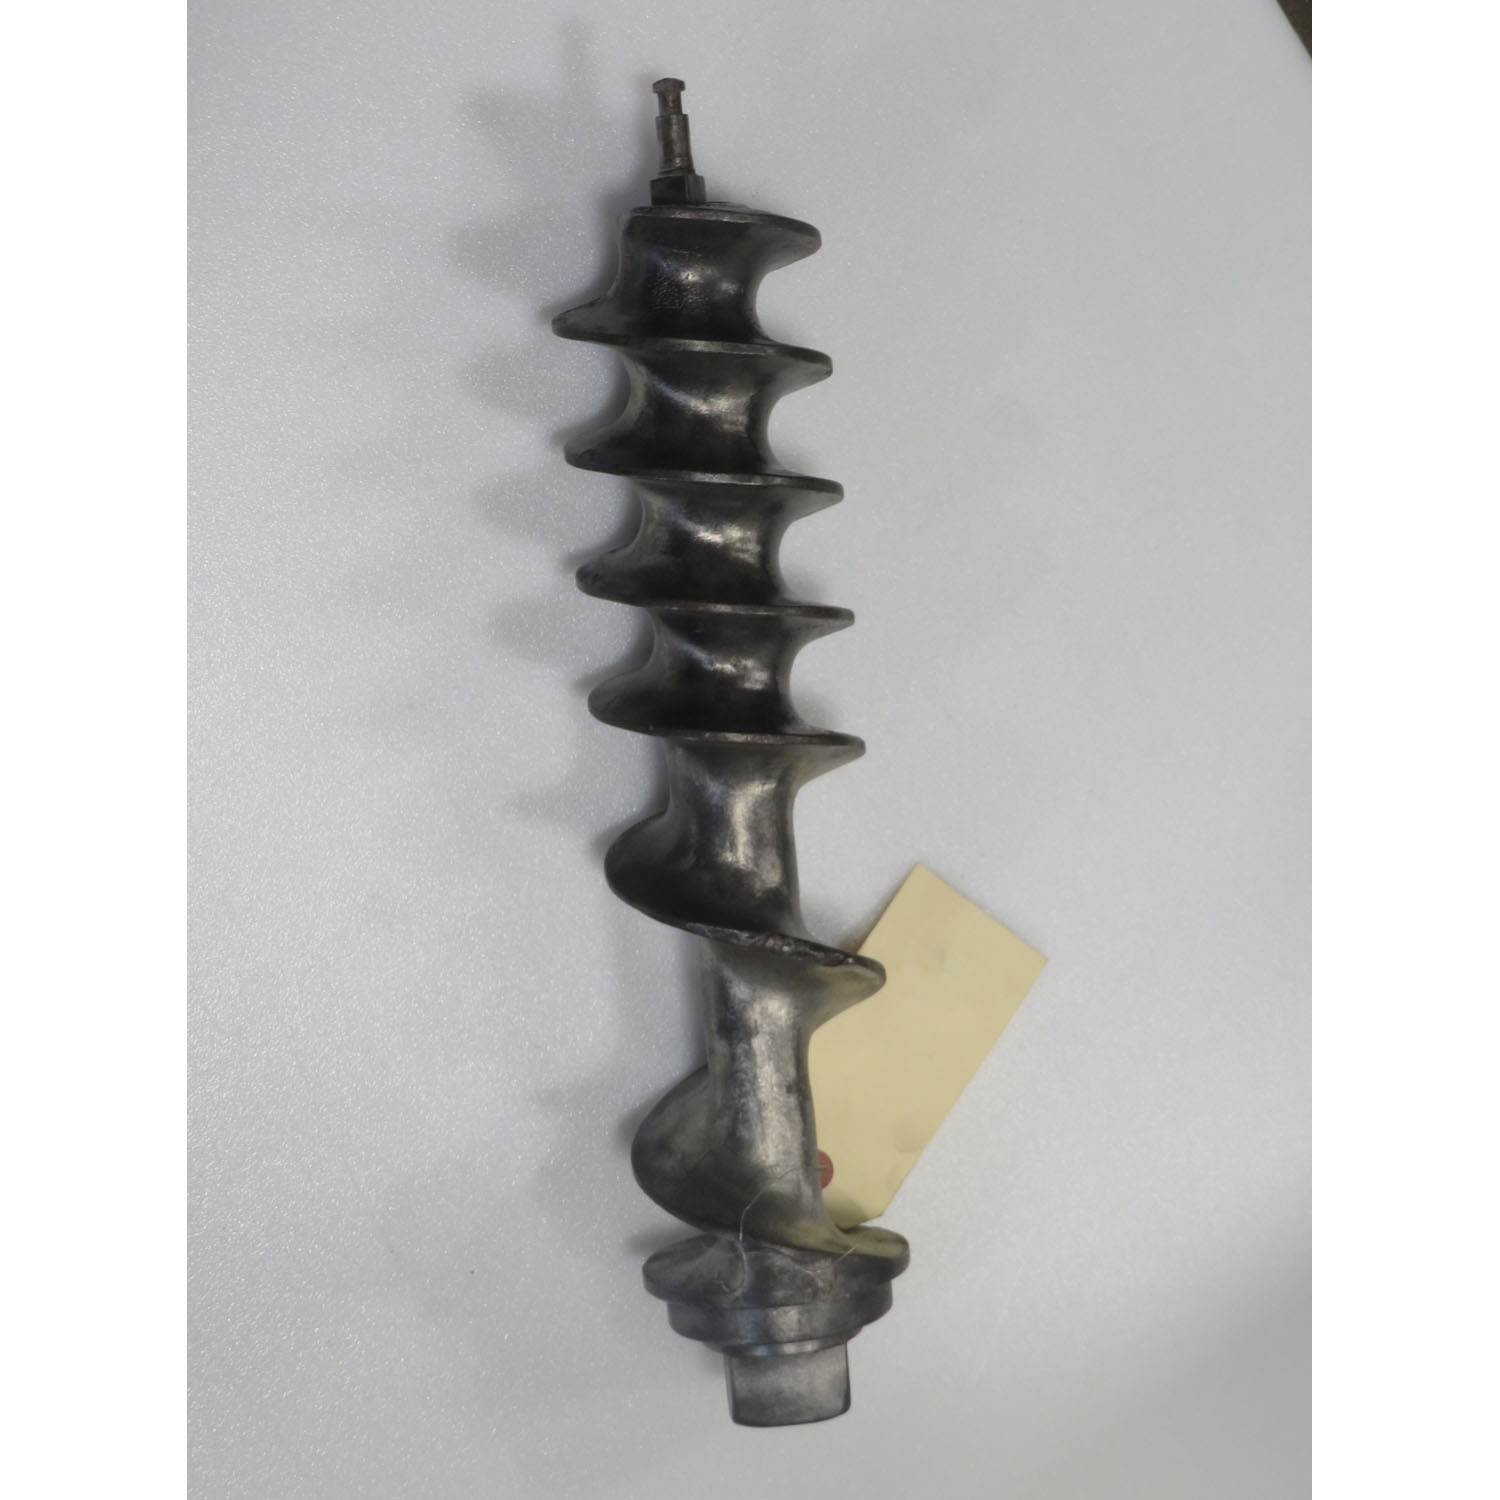 Hobart 00-111823 Worm Assembly For Model 4146 Grinder, Used Great Condition image 1